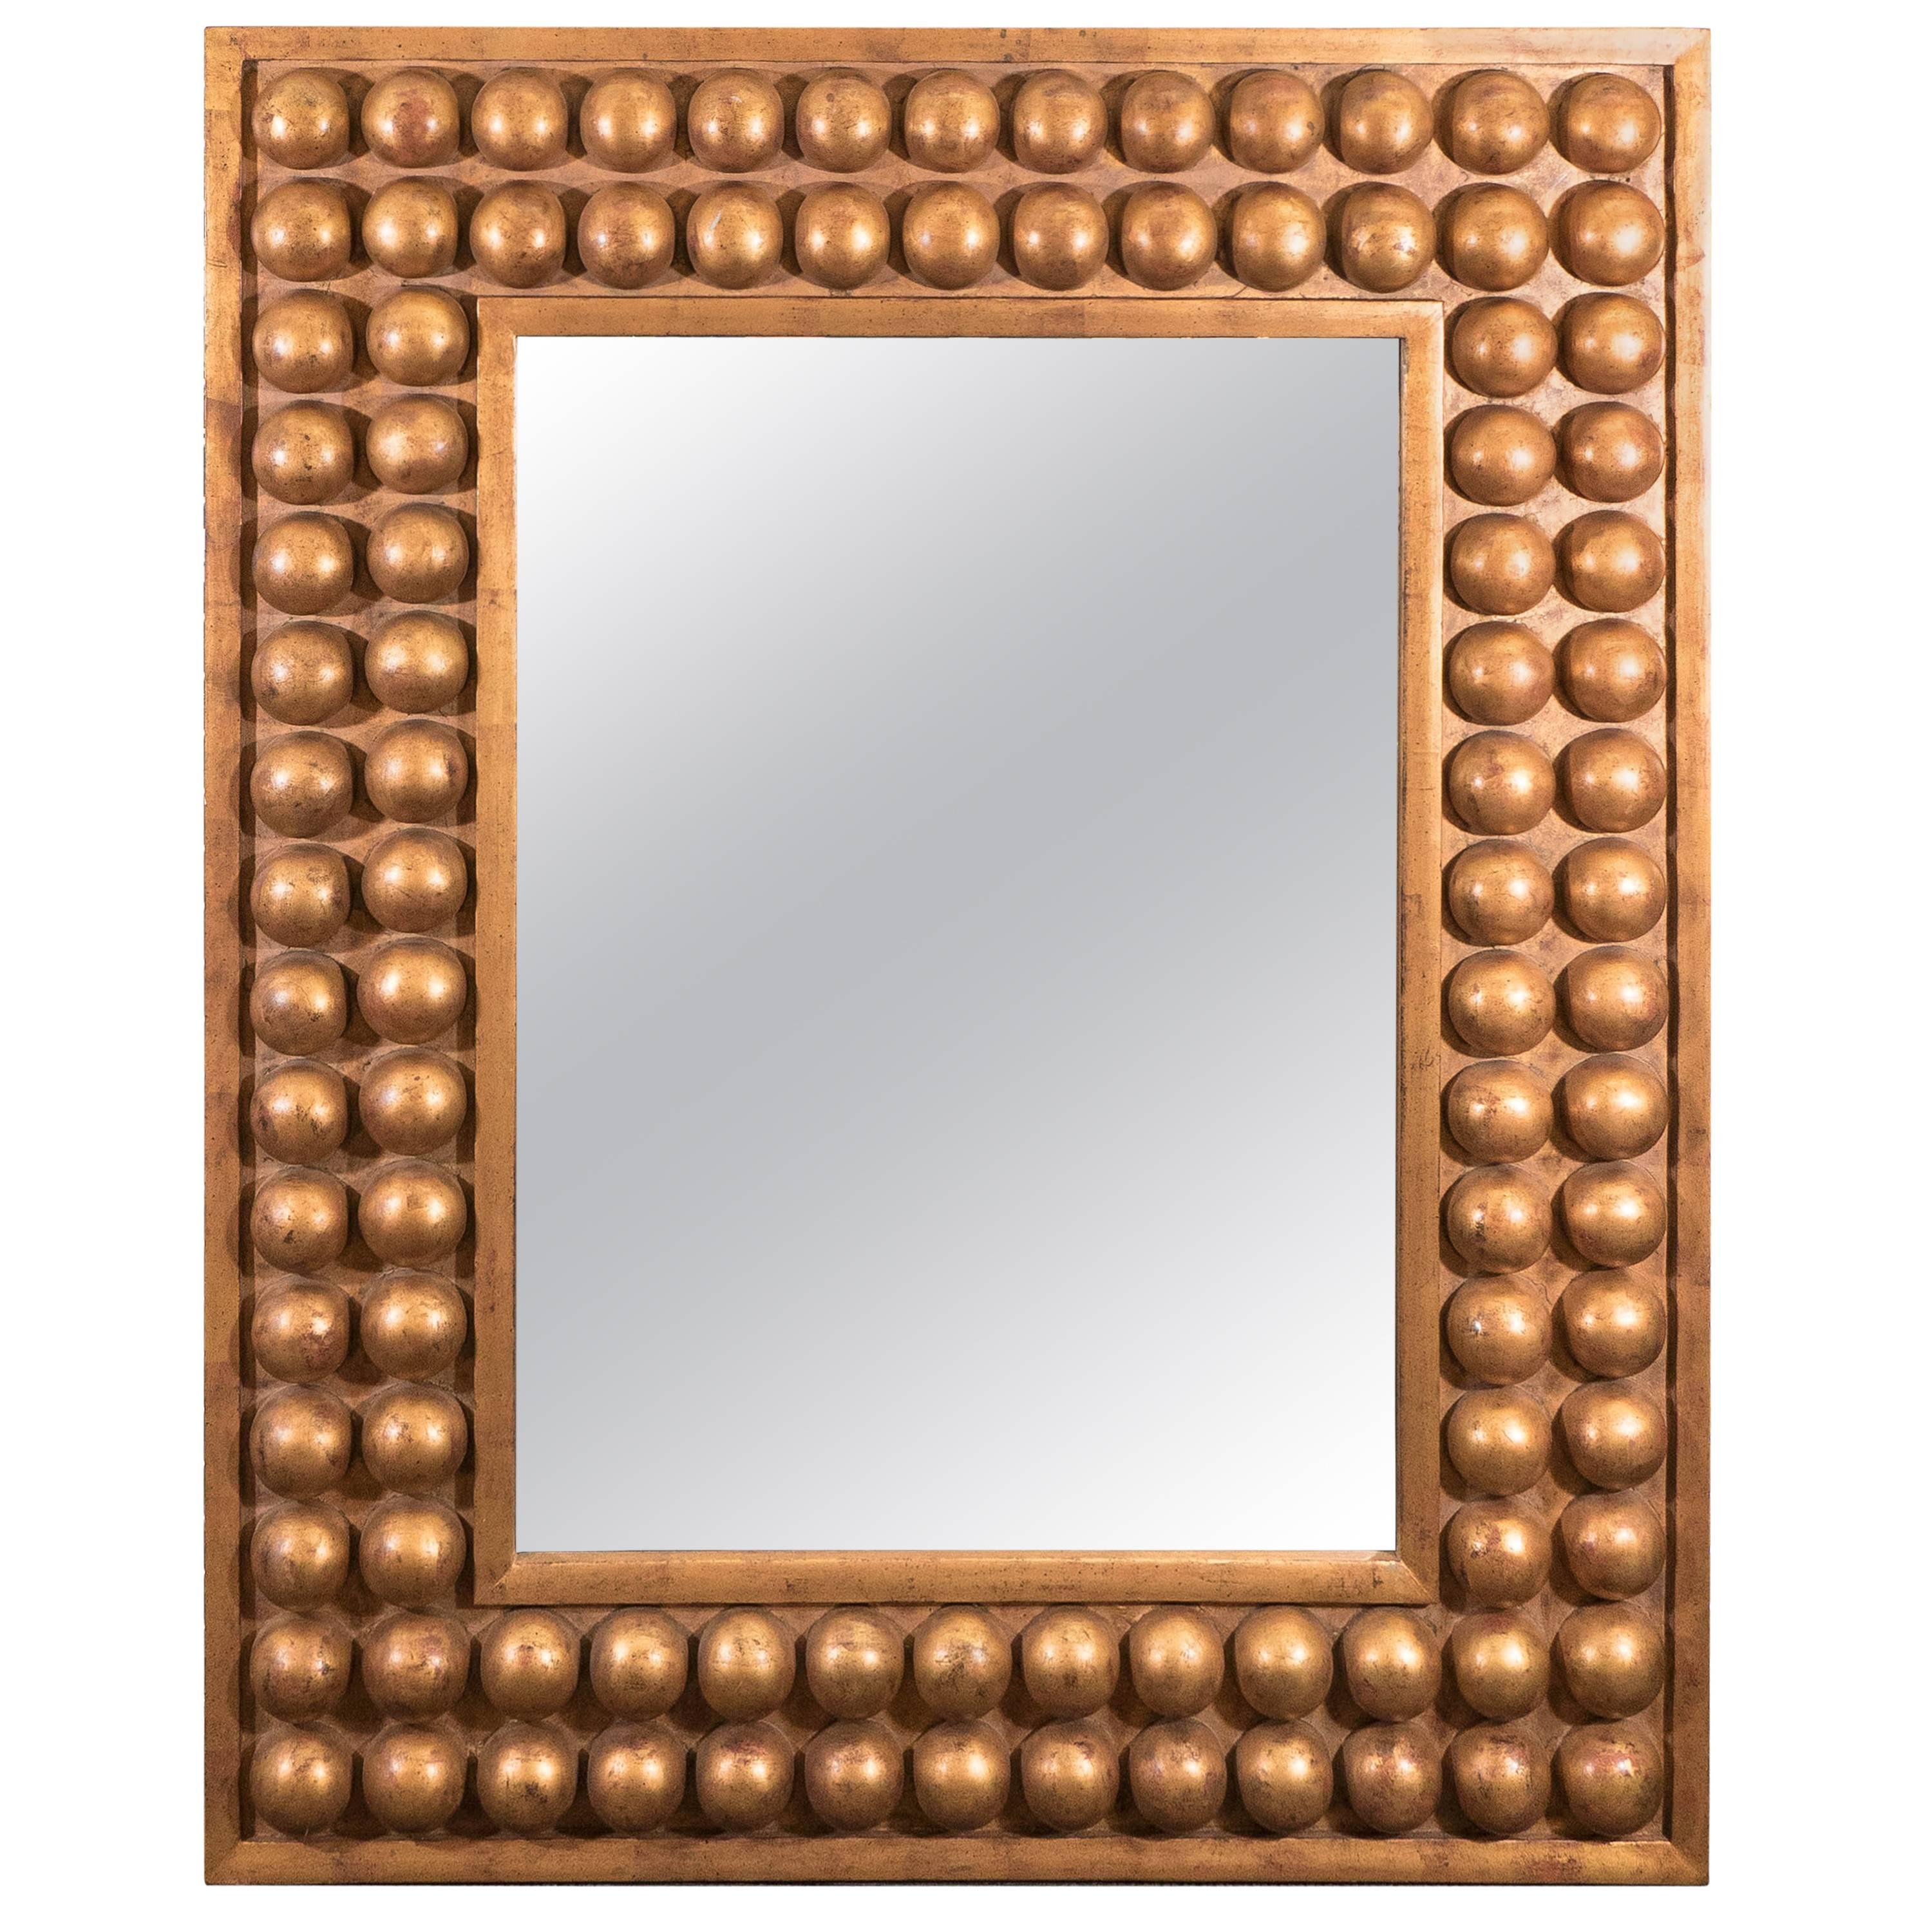 A Midcentury Italian Wall Mirror with Modernistic Giltwood Frame